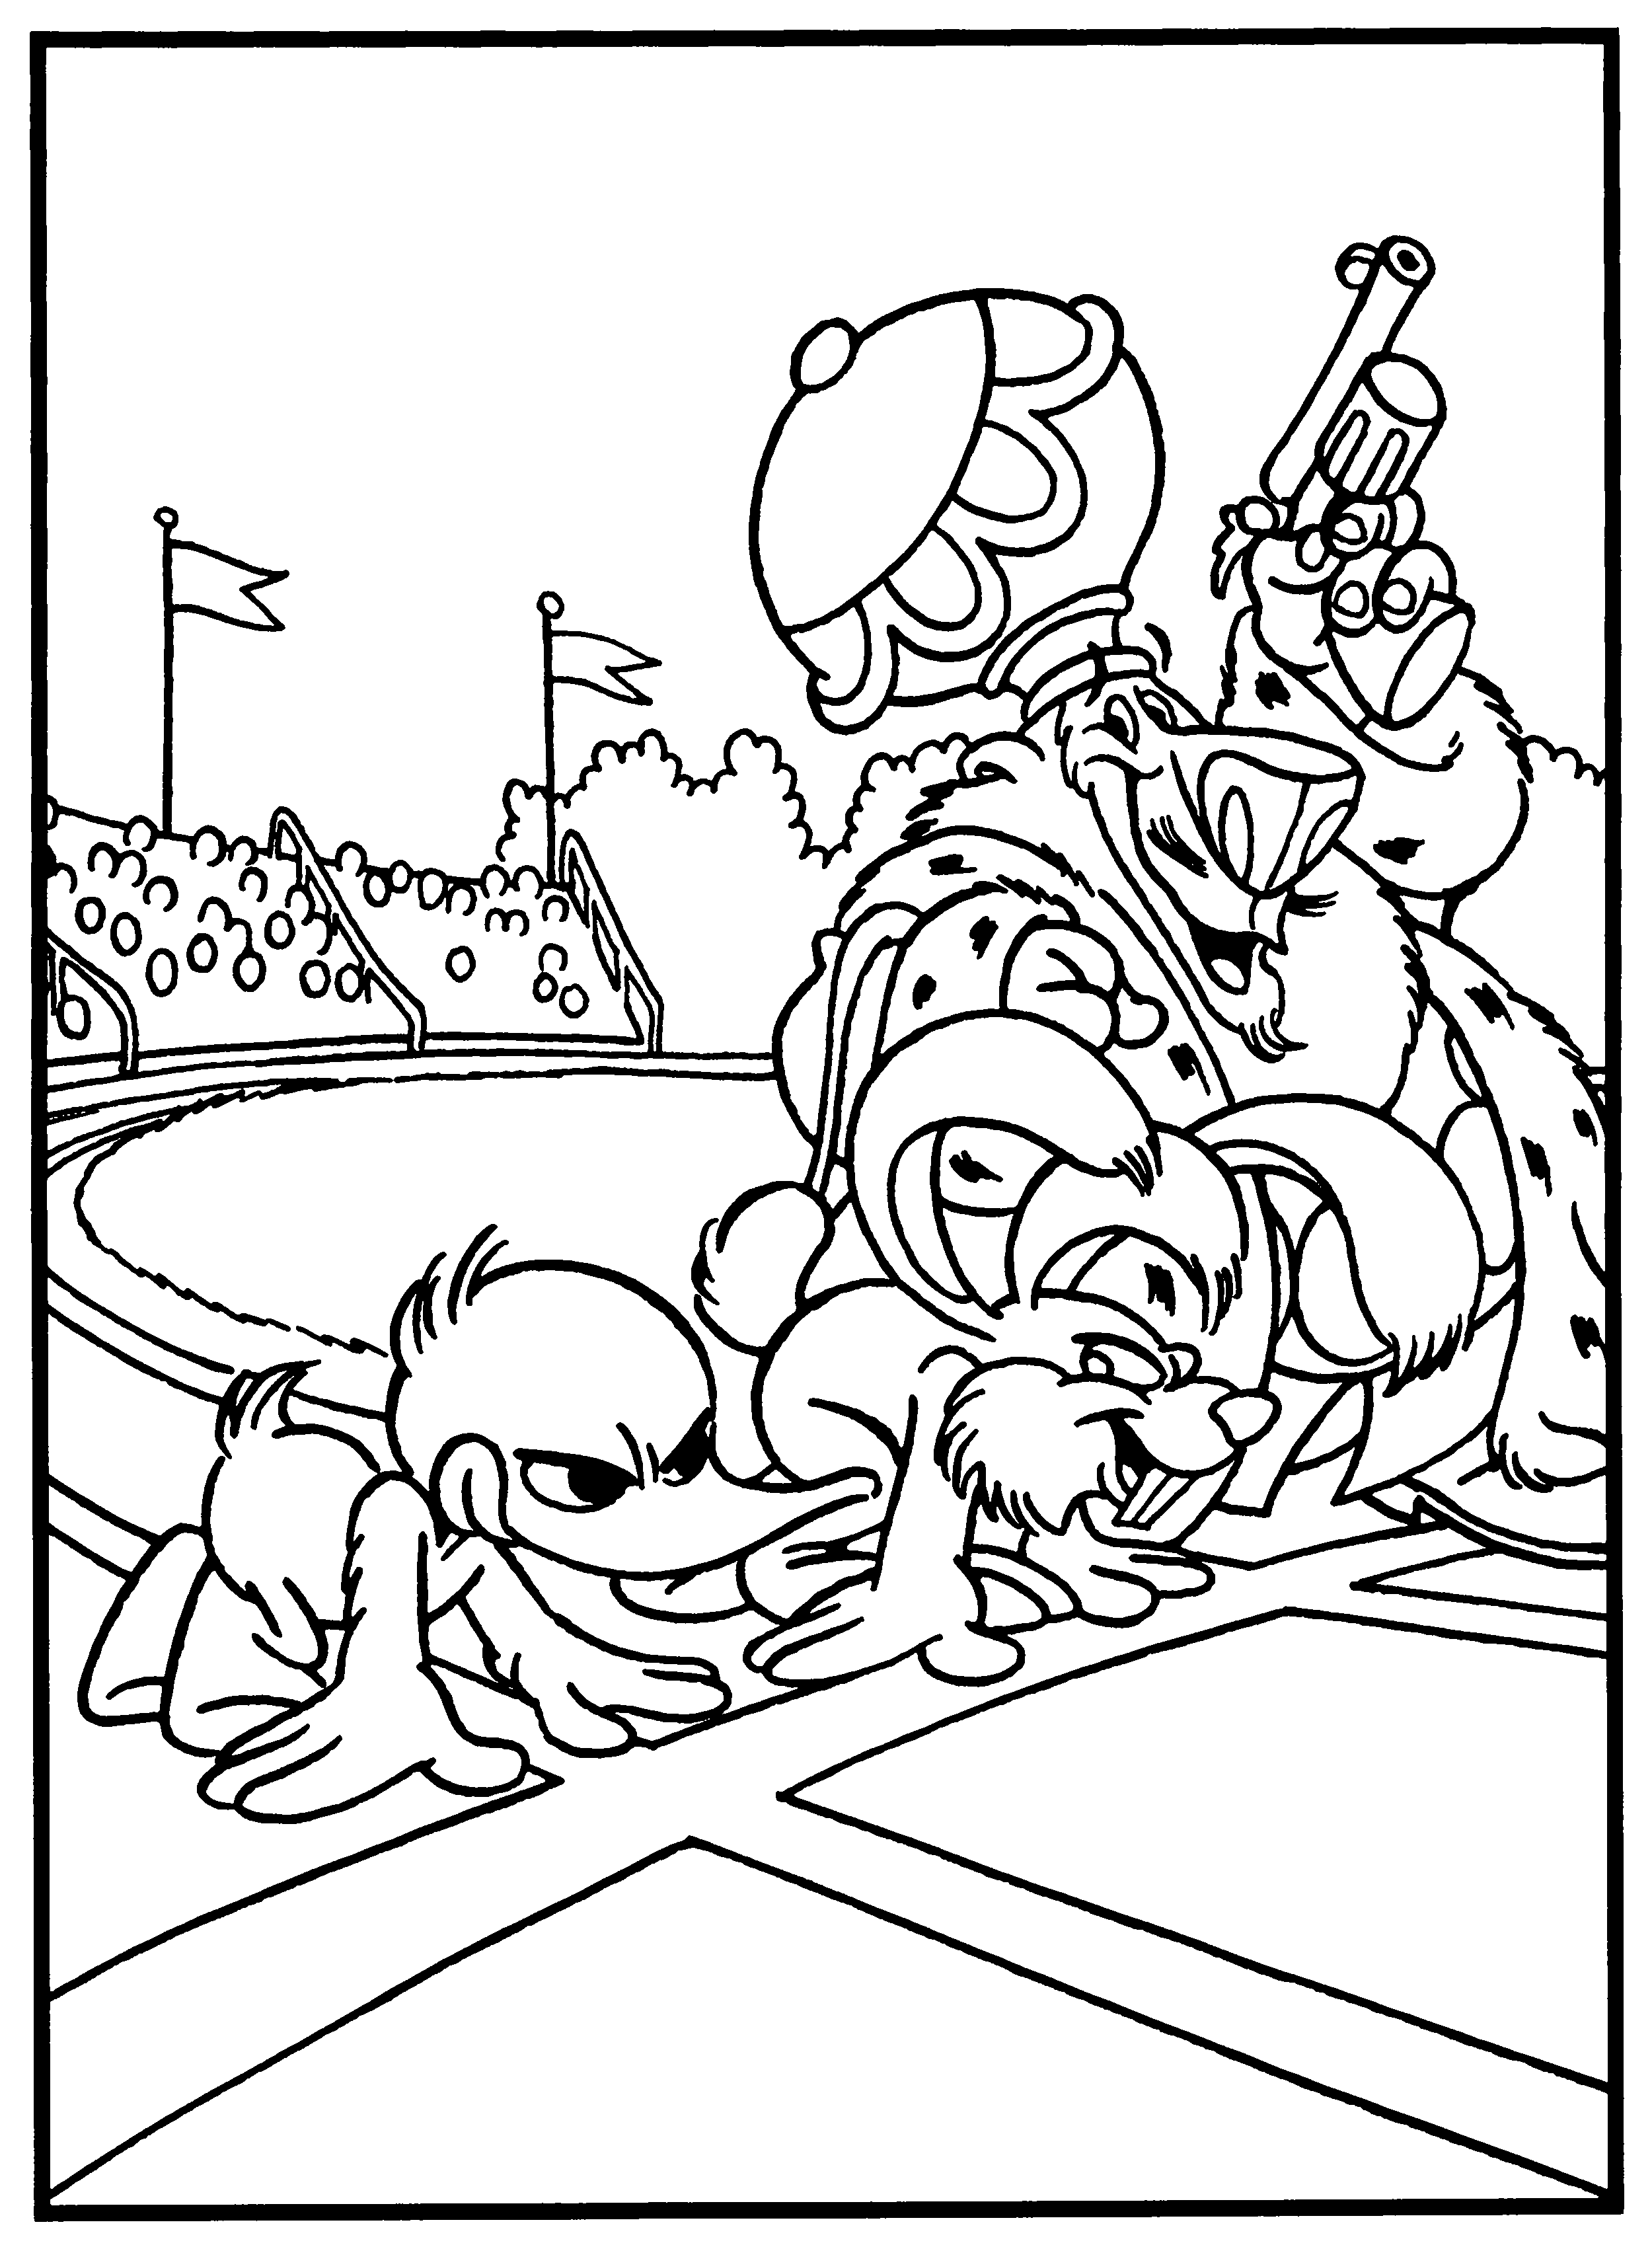 Alfred J Kwak coloring page